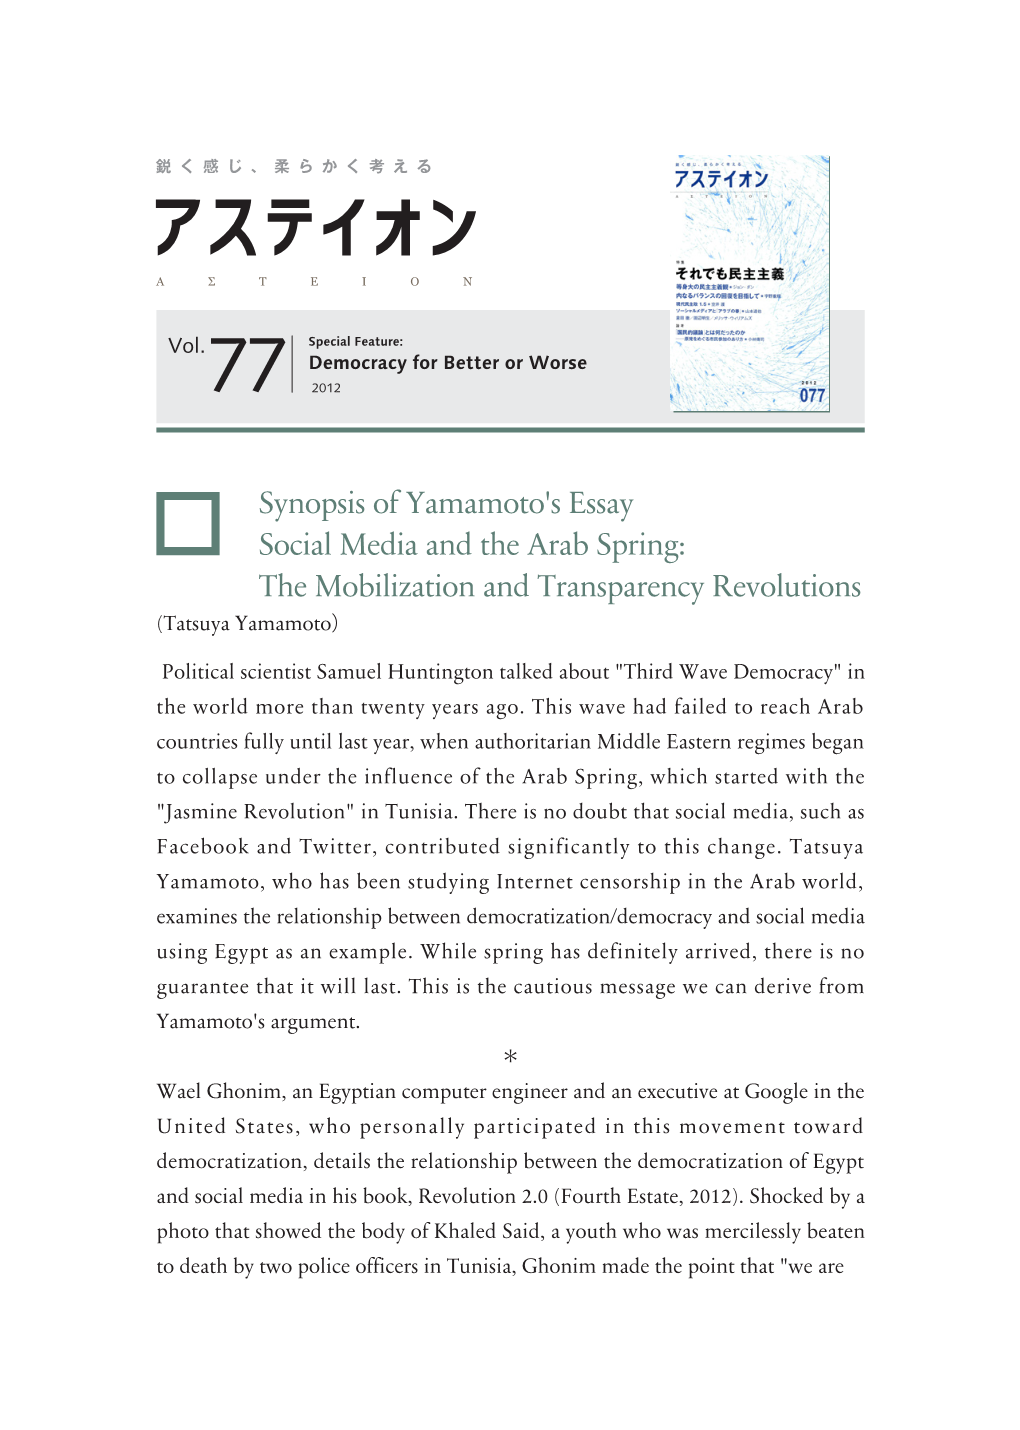 Synopsis of Yamamoto's Essay Social Media and the Arab Spring: the Mobilization and Transparency Revolutions (Tatsuya Yamamoto）